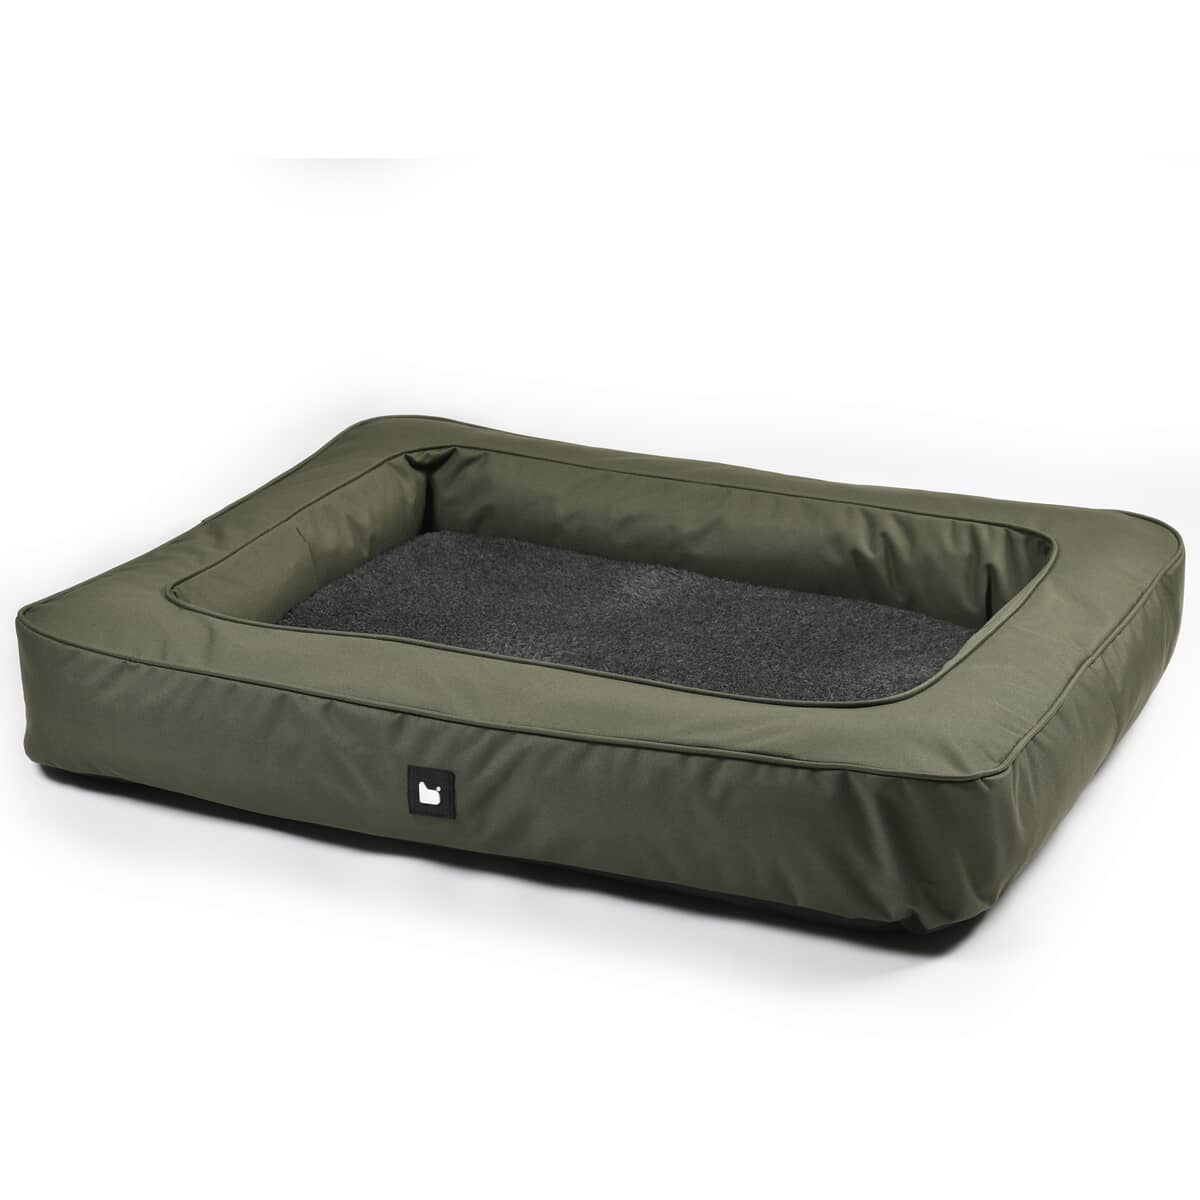 Extreme Lounging B Dog Monster Dog Bed Forest Green H15 x W100 x L80cm